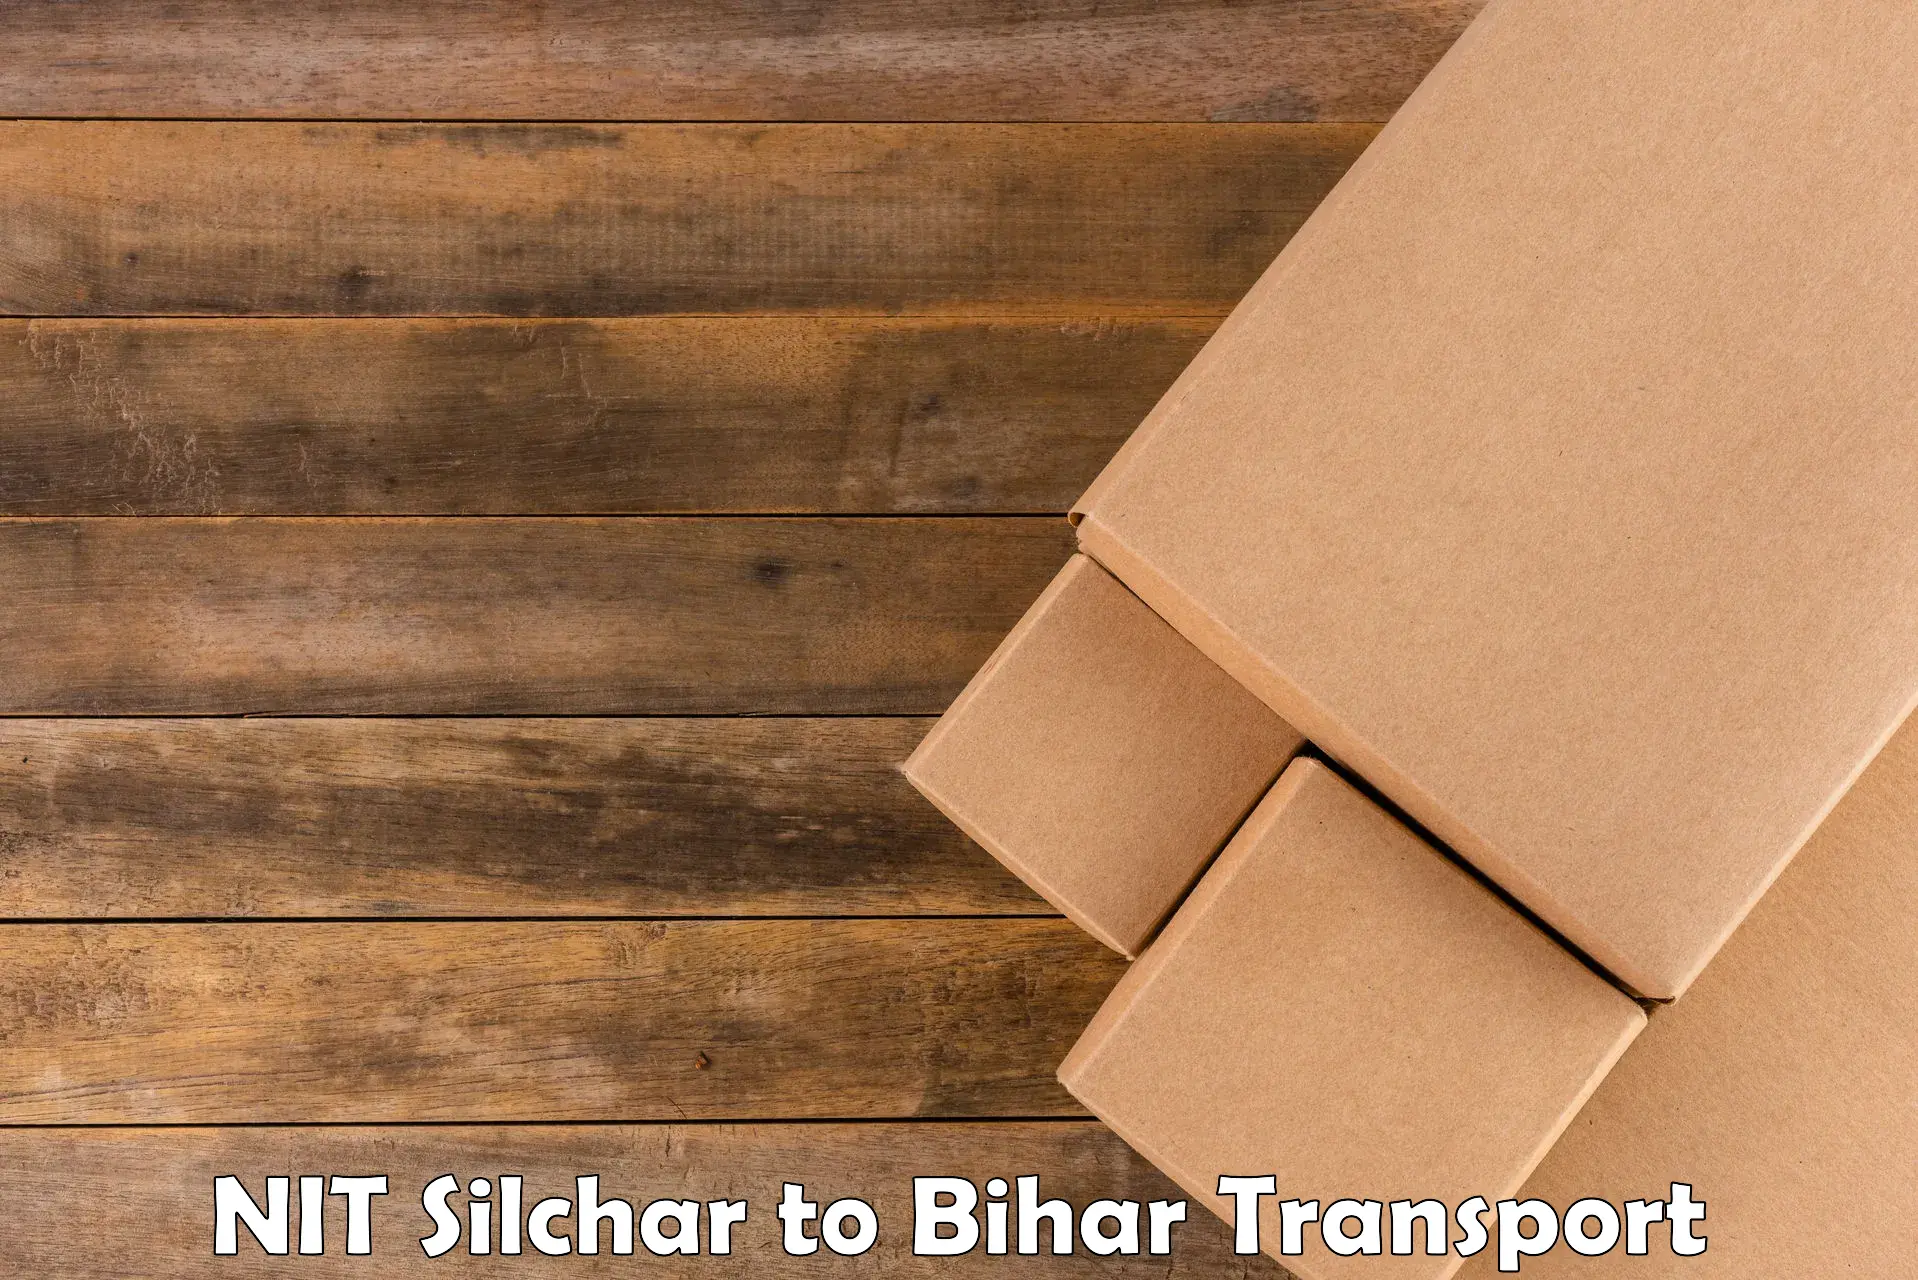 Truck transport companies in India NIT Silchar to Kahalgaon